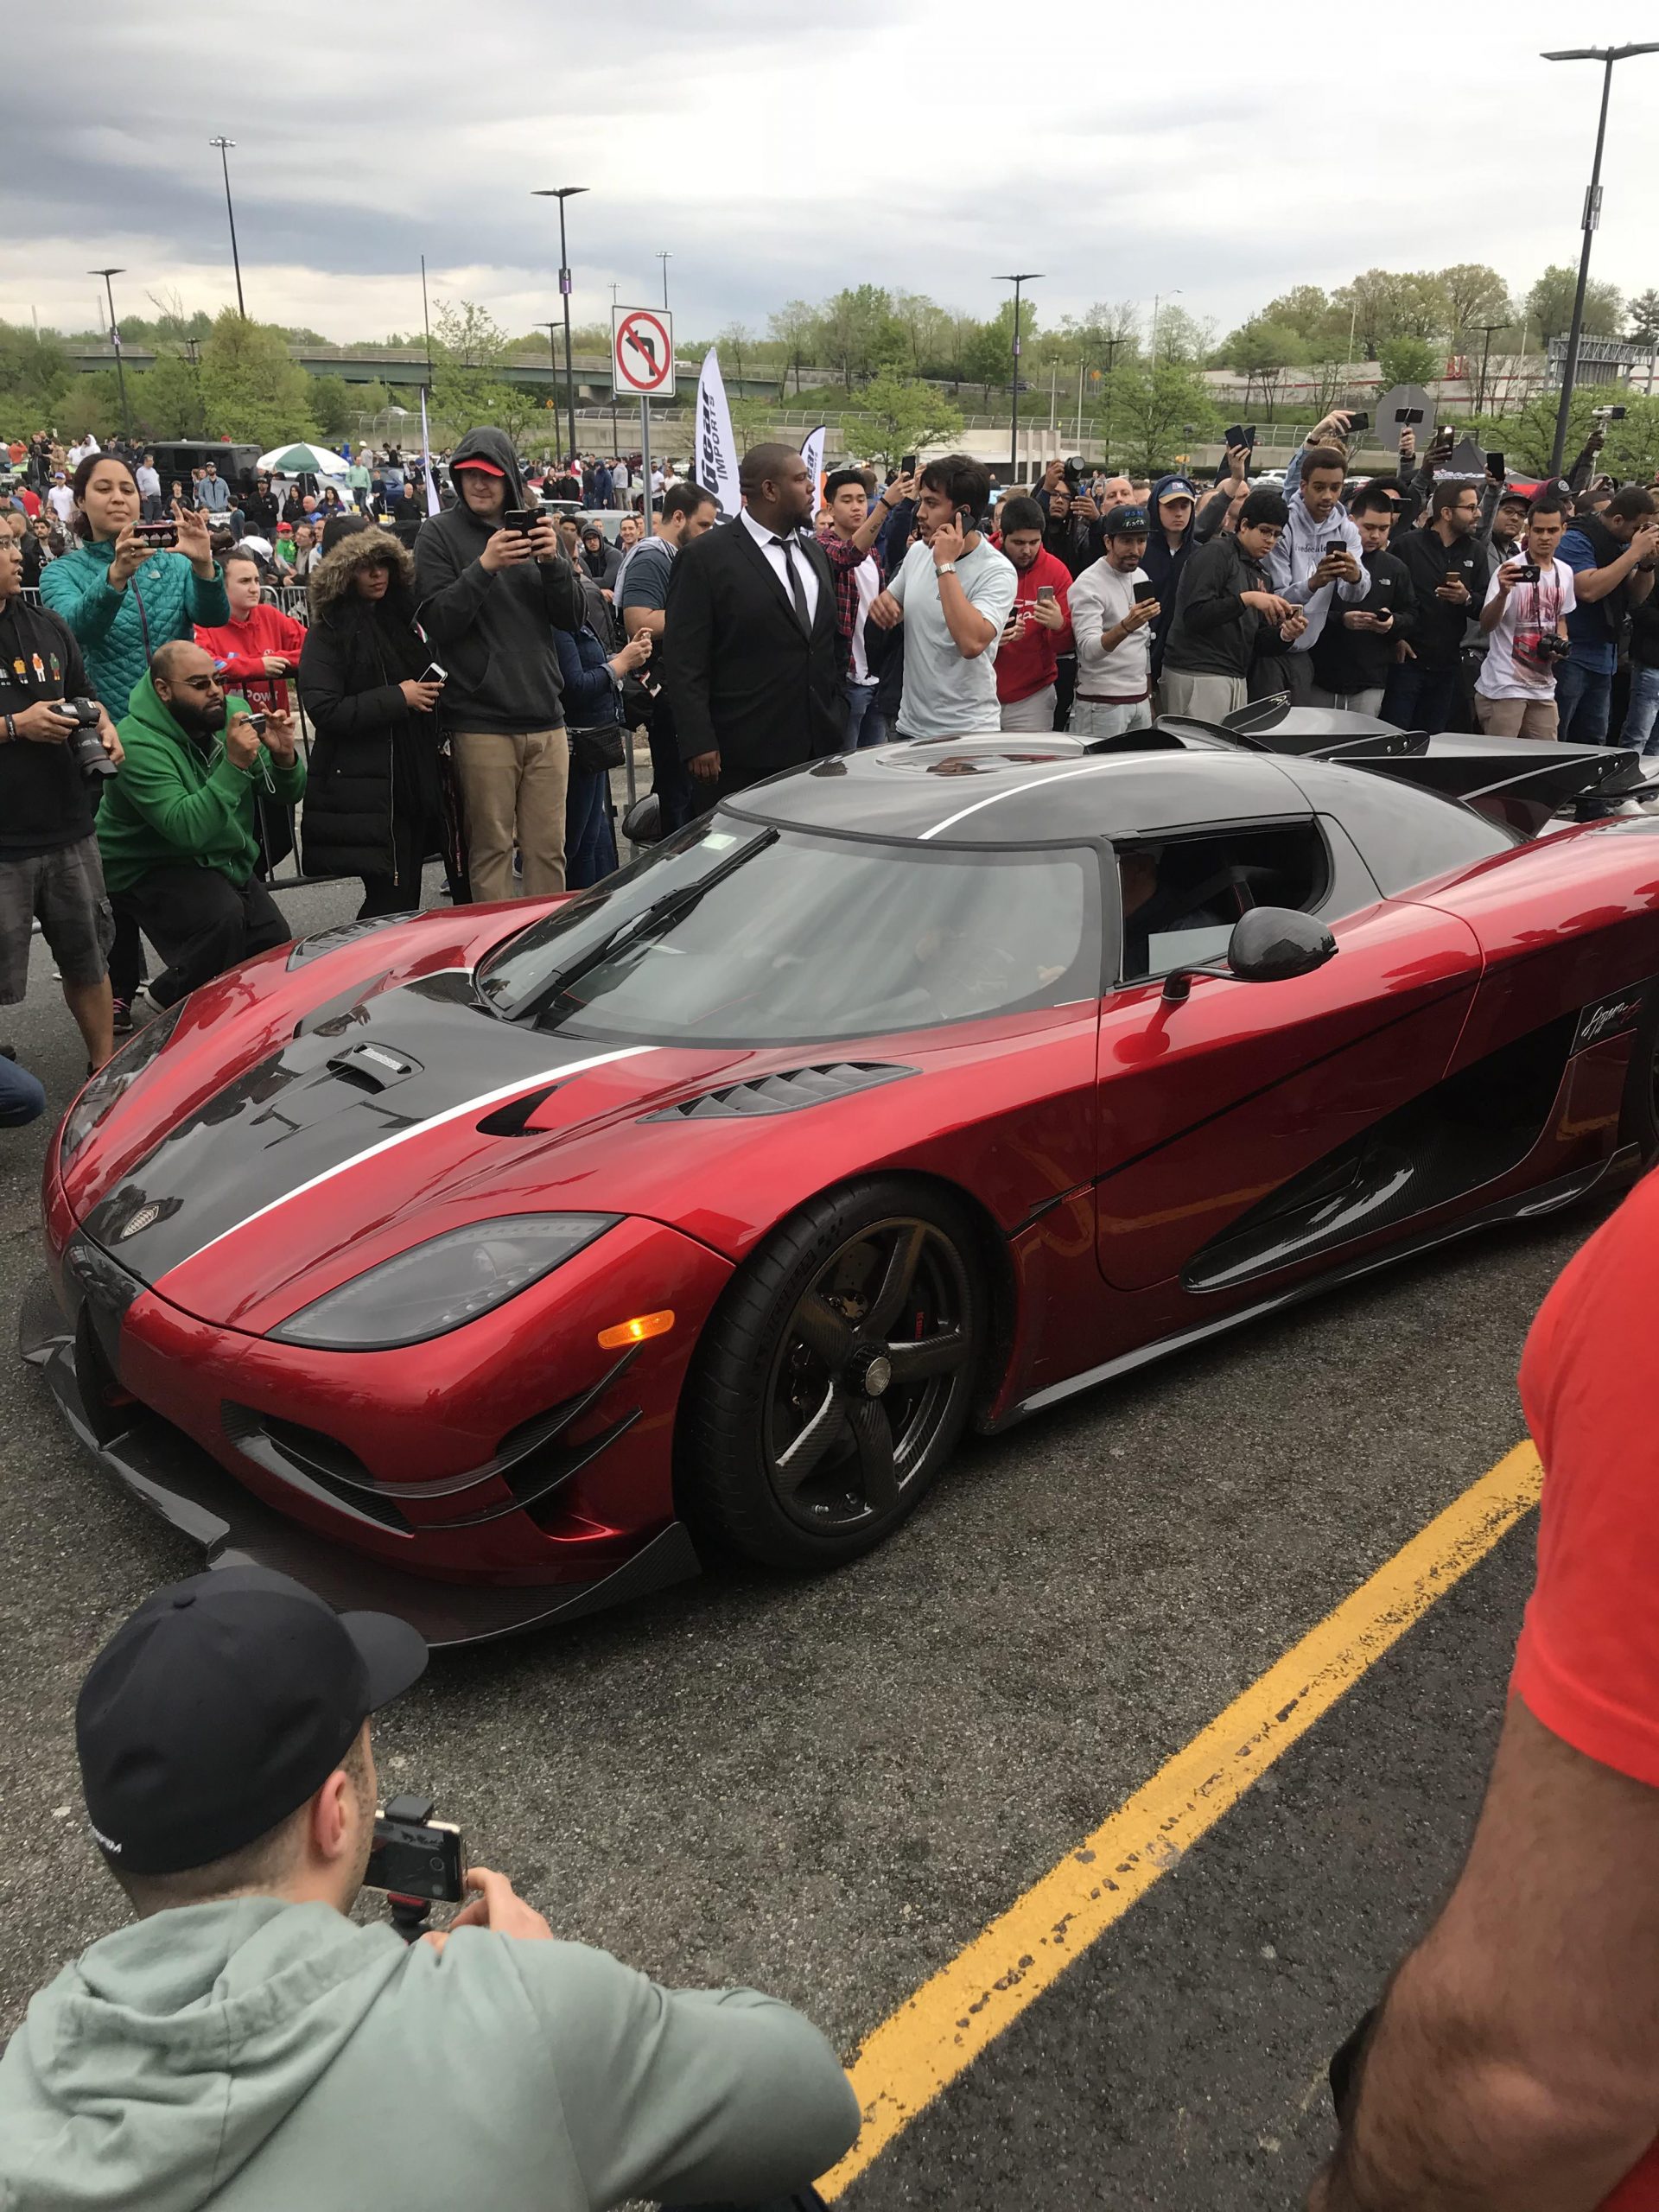 Seeing a Koenigsegg for the first time